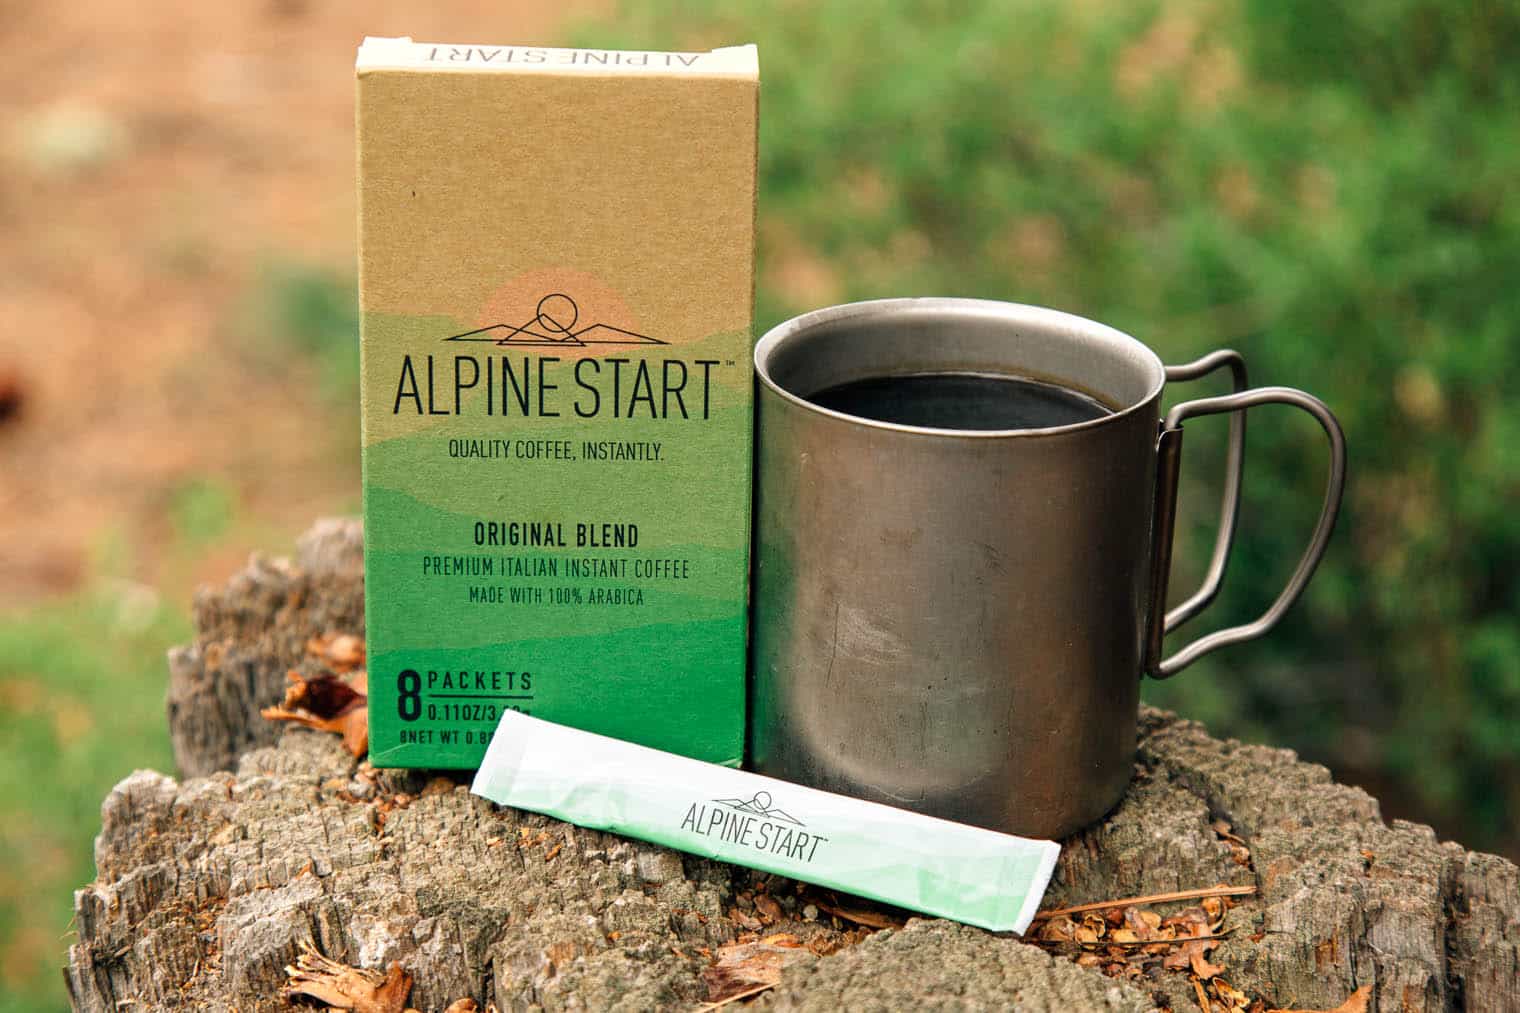 Alpine Start instant coffee packaging next to a camp mug